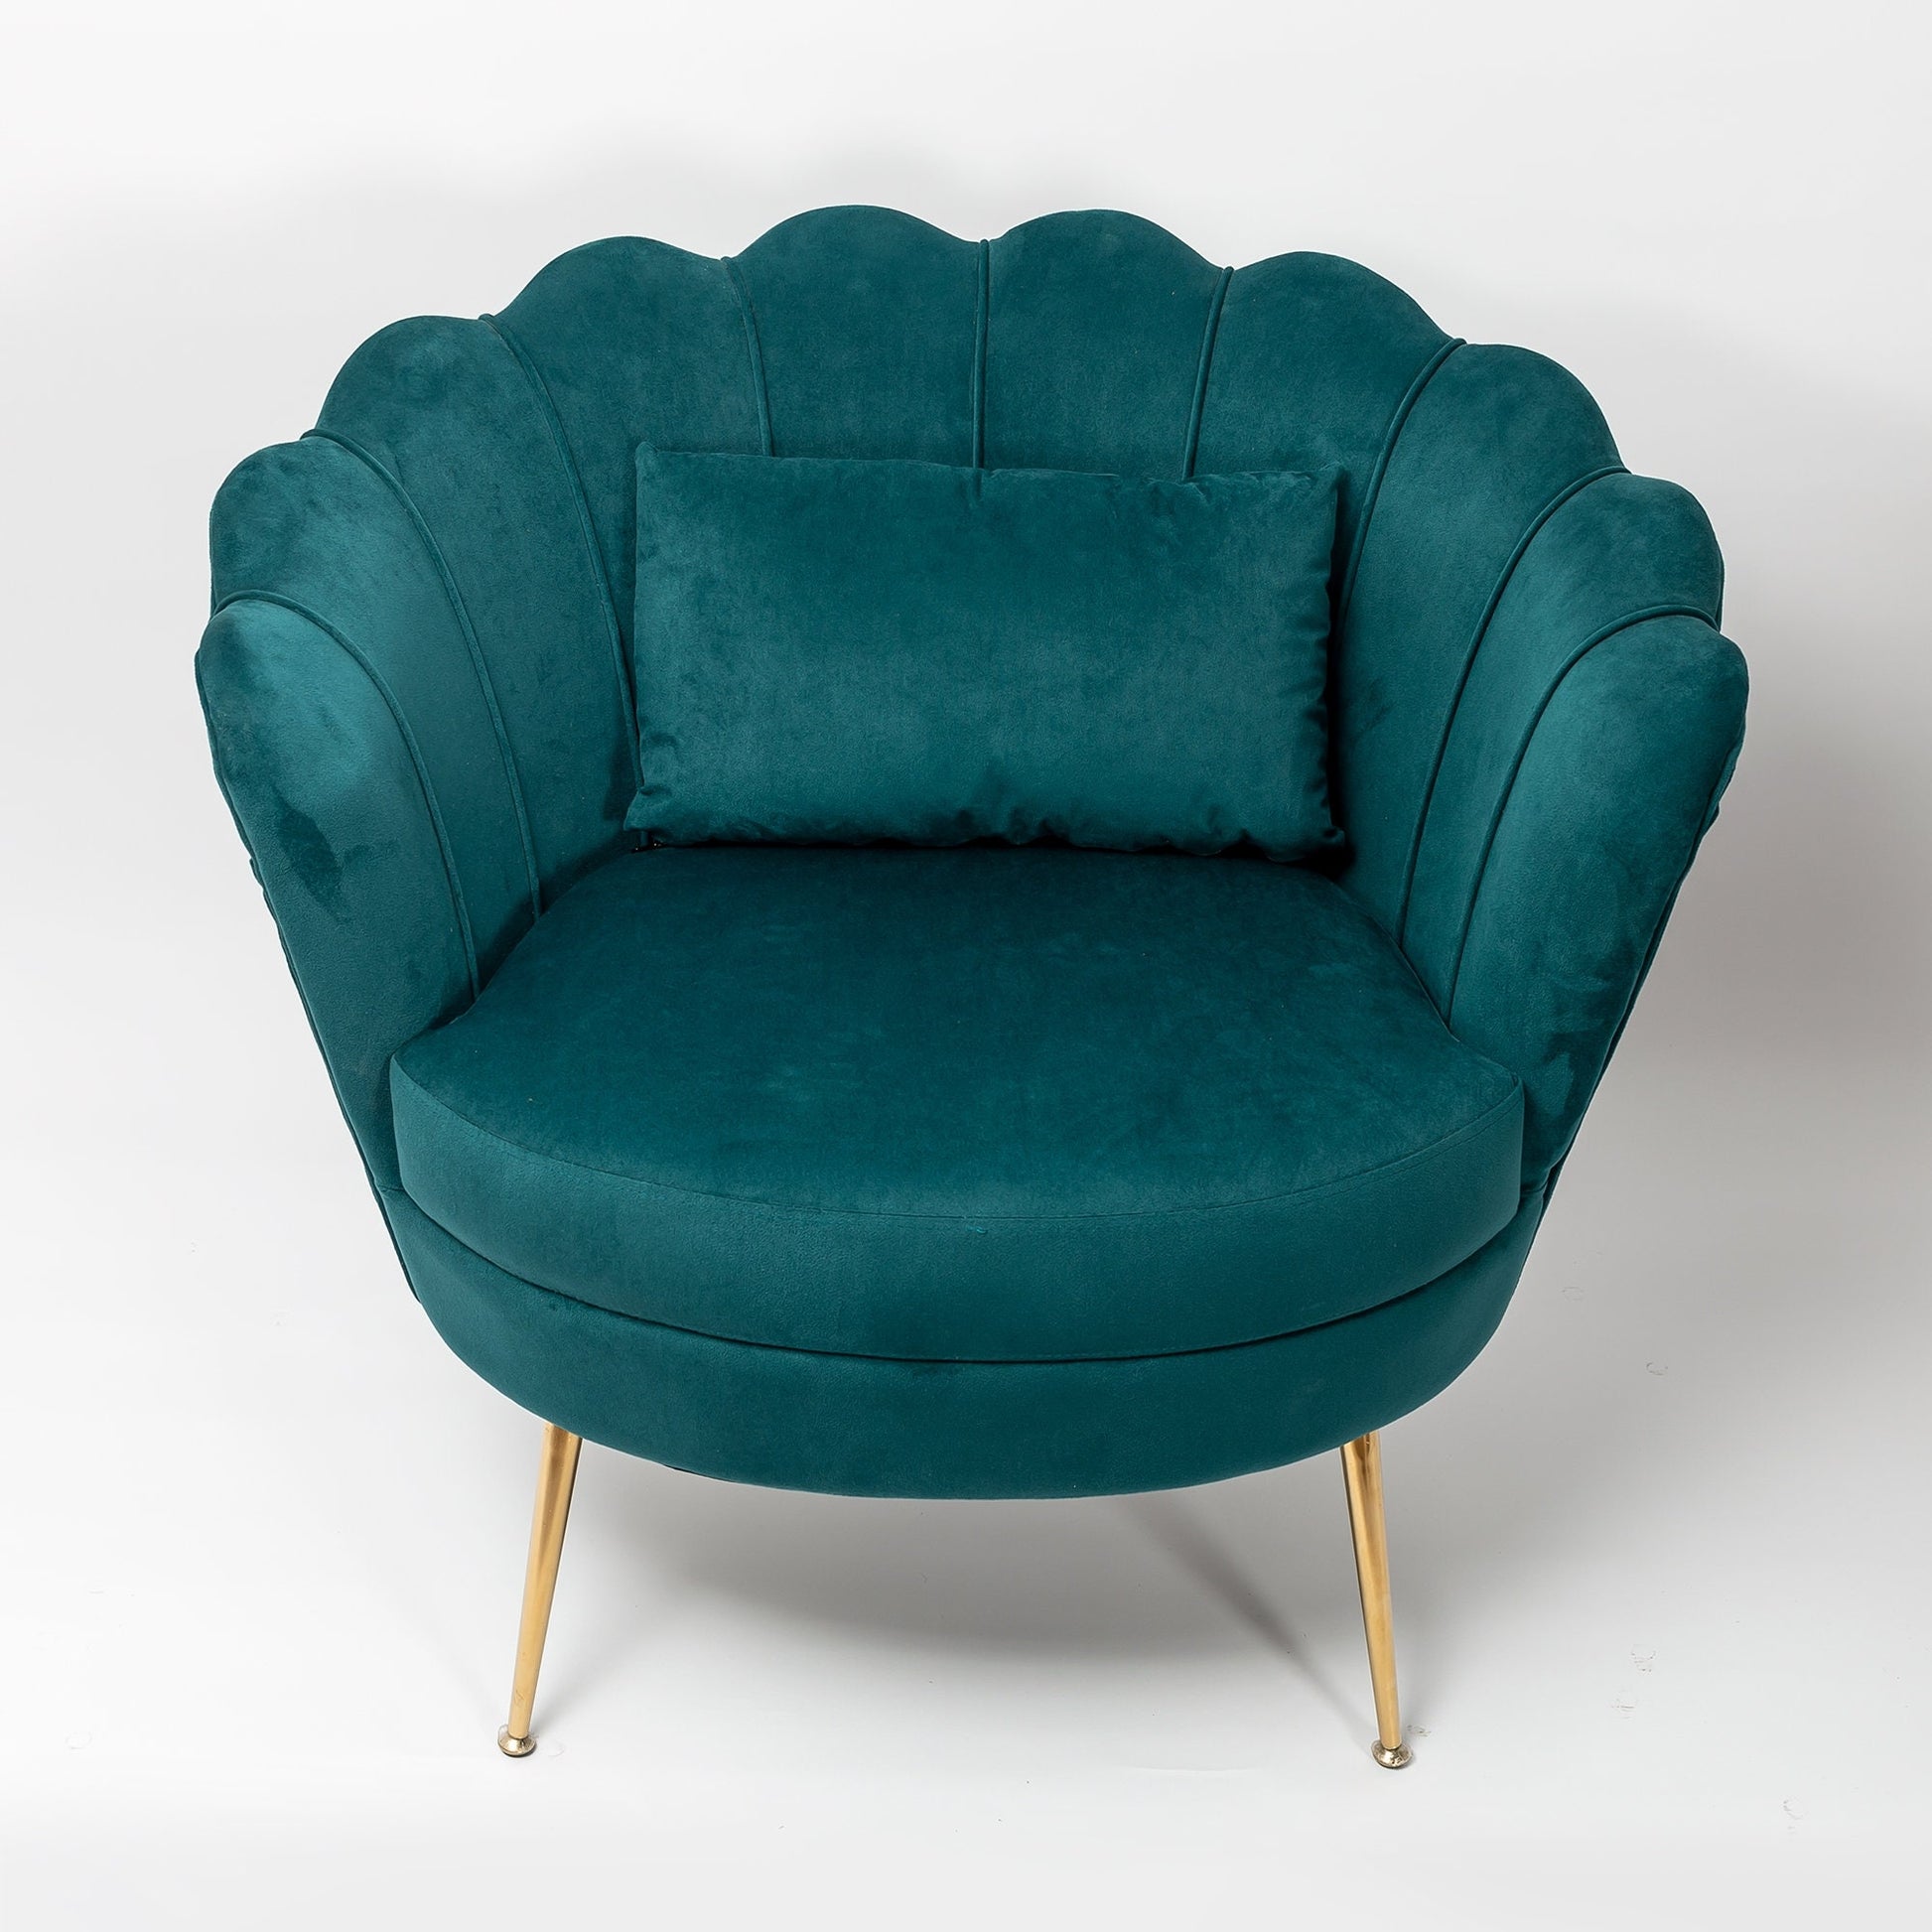 Art Deco Style Deep Teal Velvet Cocktail Chair With Gold Legs – Lush Home  Interiors